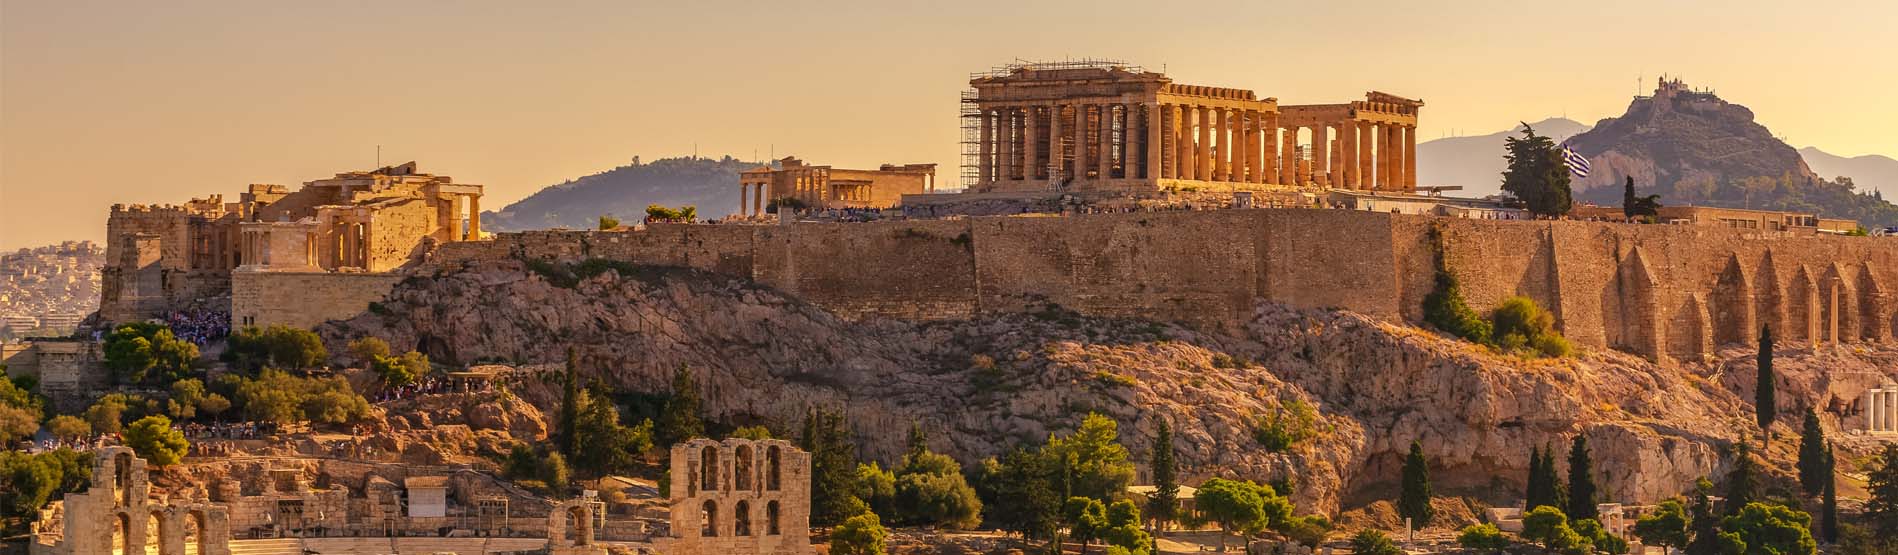 Image of old historical buildings in Greece on a hill